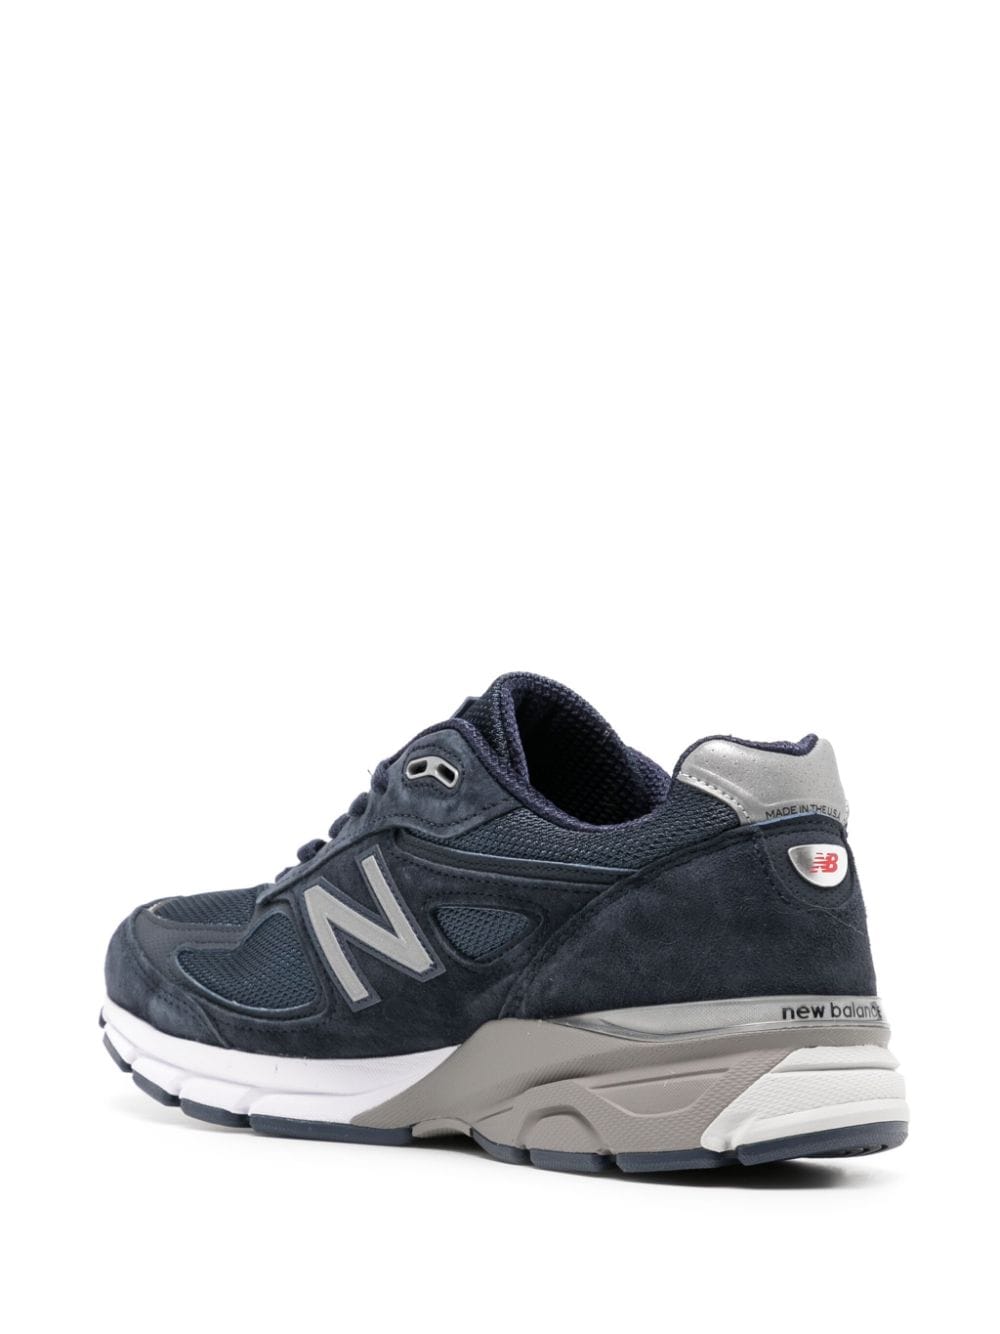 990v4 low-top sneakers<BR/><BR/>